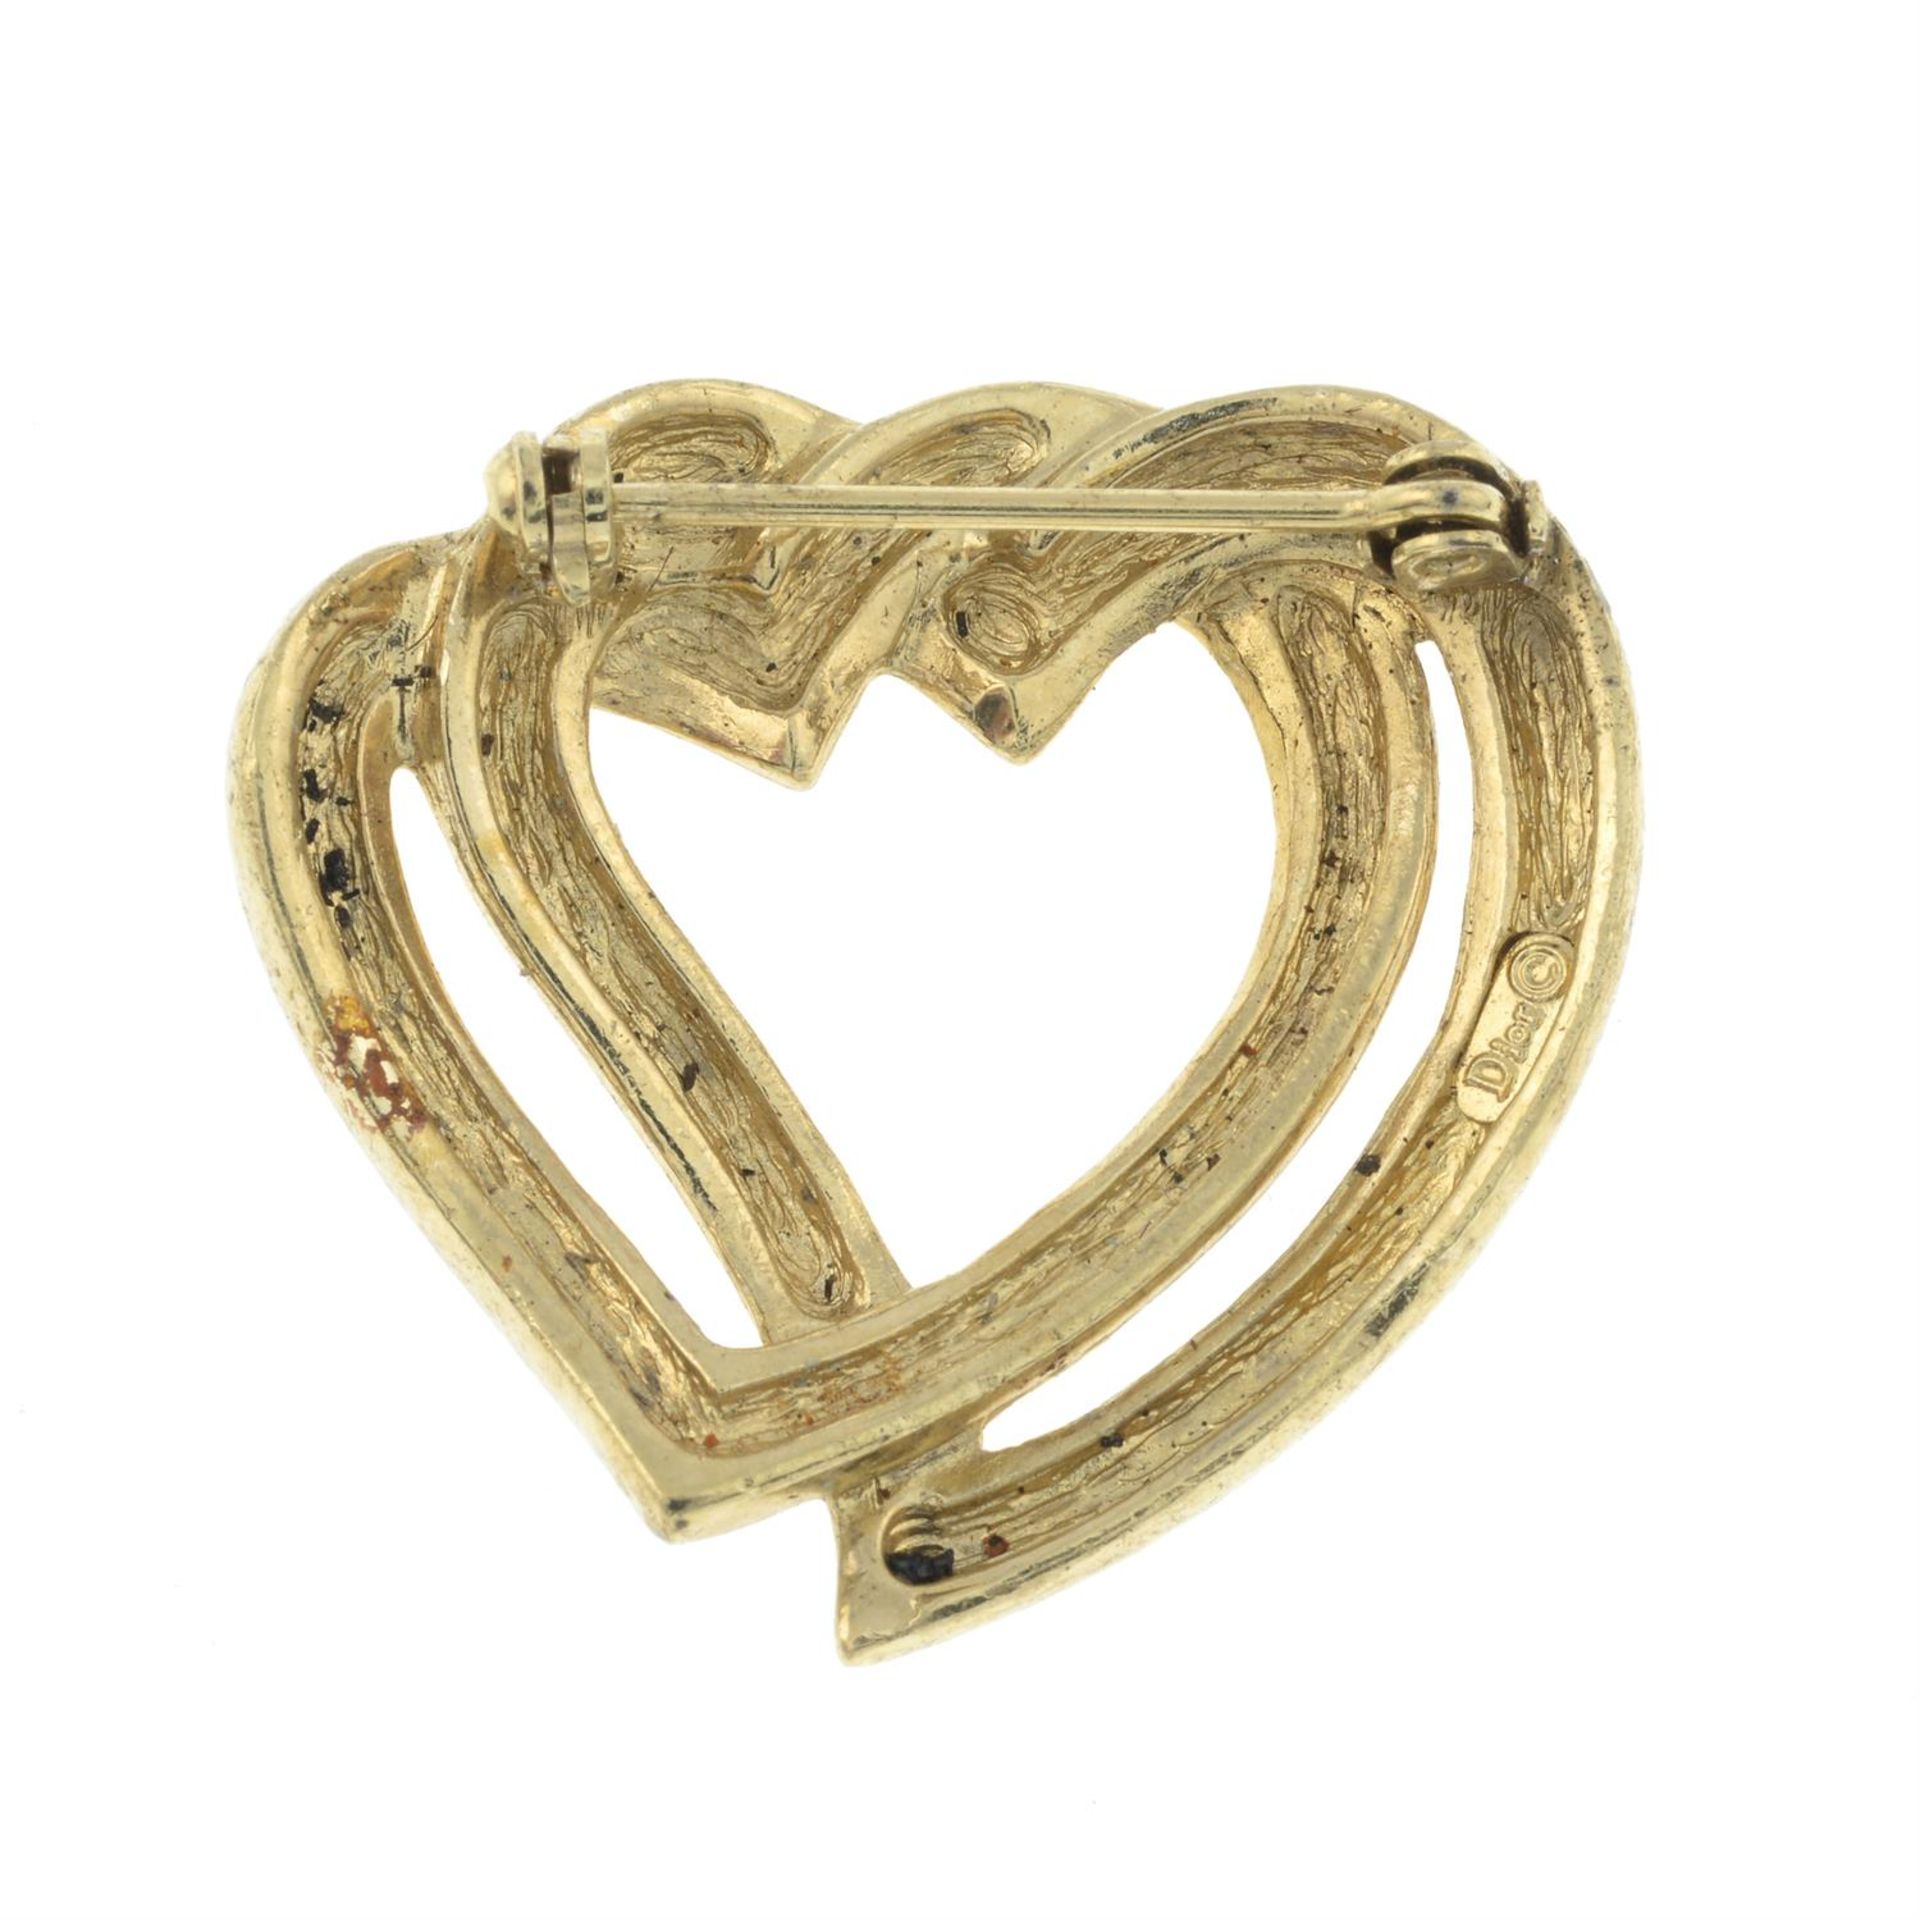 CHRISTIAN DIOR- a heart brooch. - Image 2 of 2